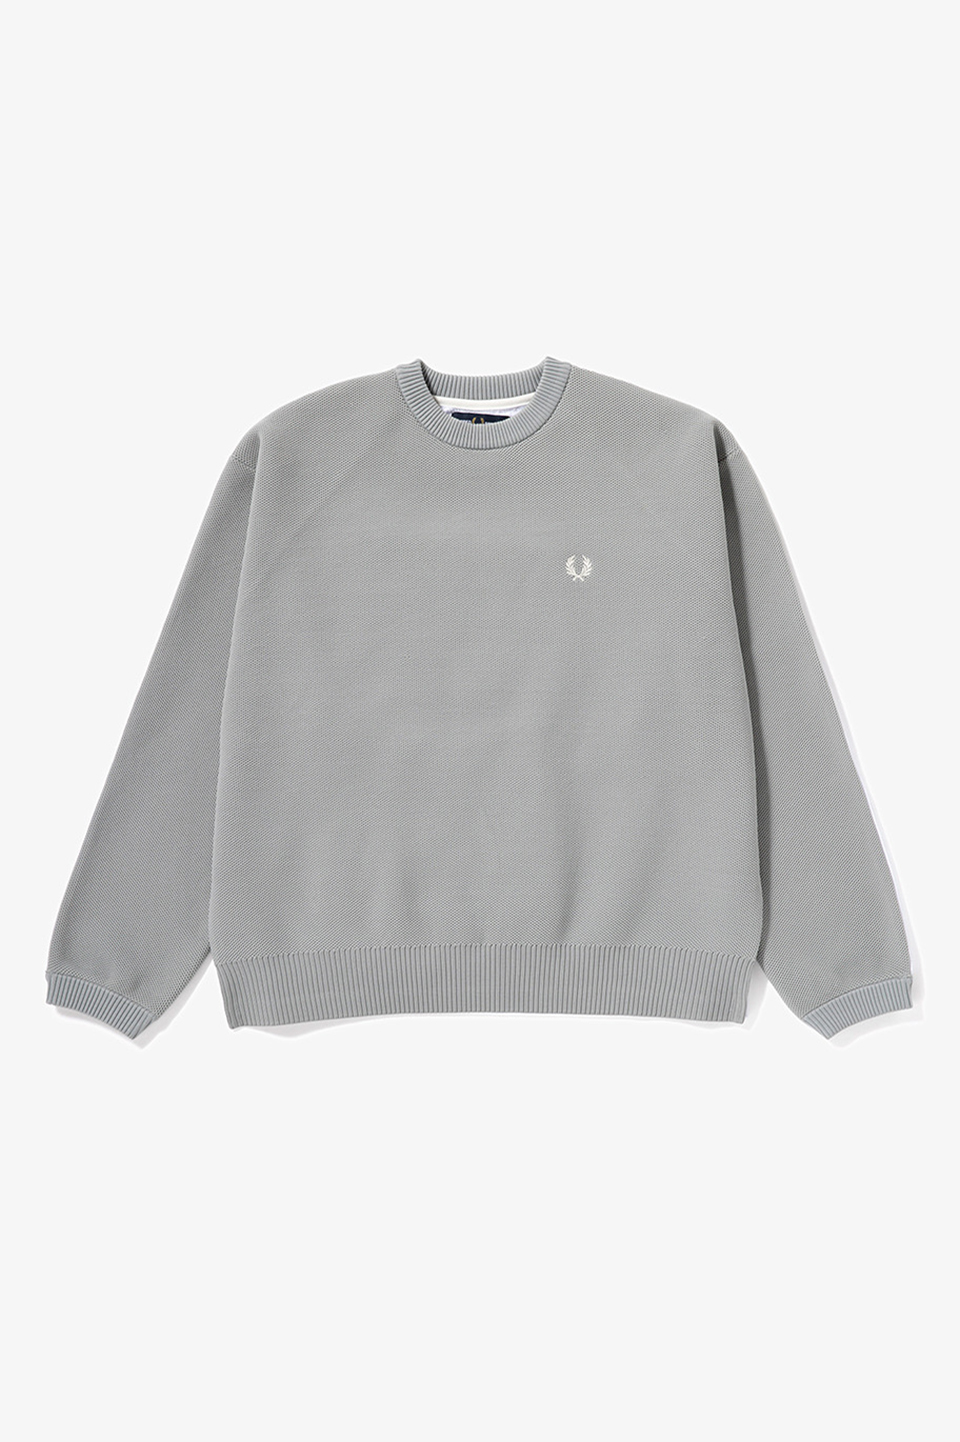 Knitwear Block Tee(10 11：LIME STONE): | FRED PERRY JAPAN 